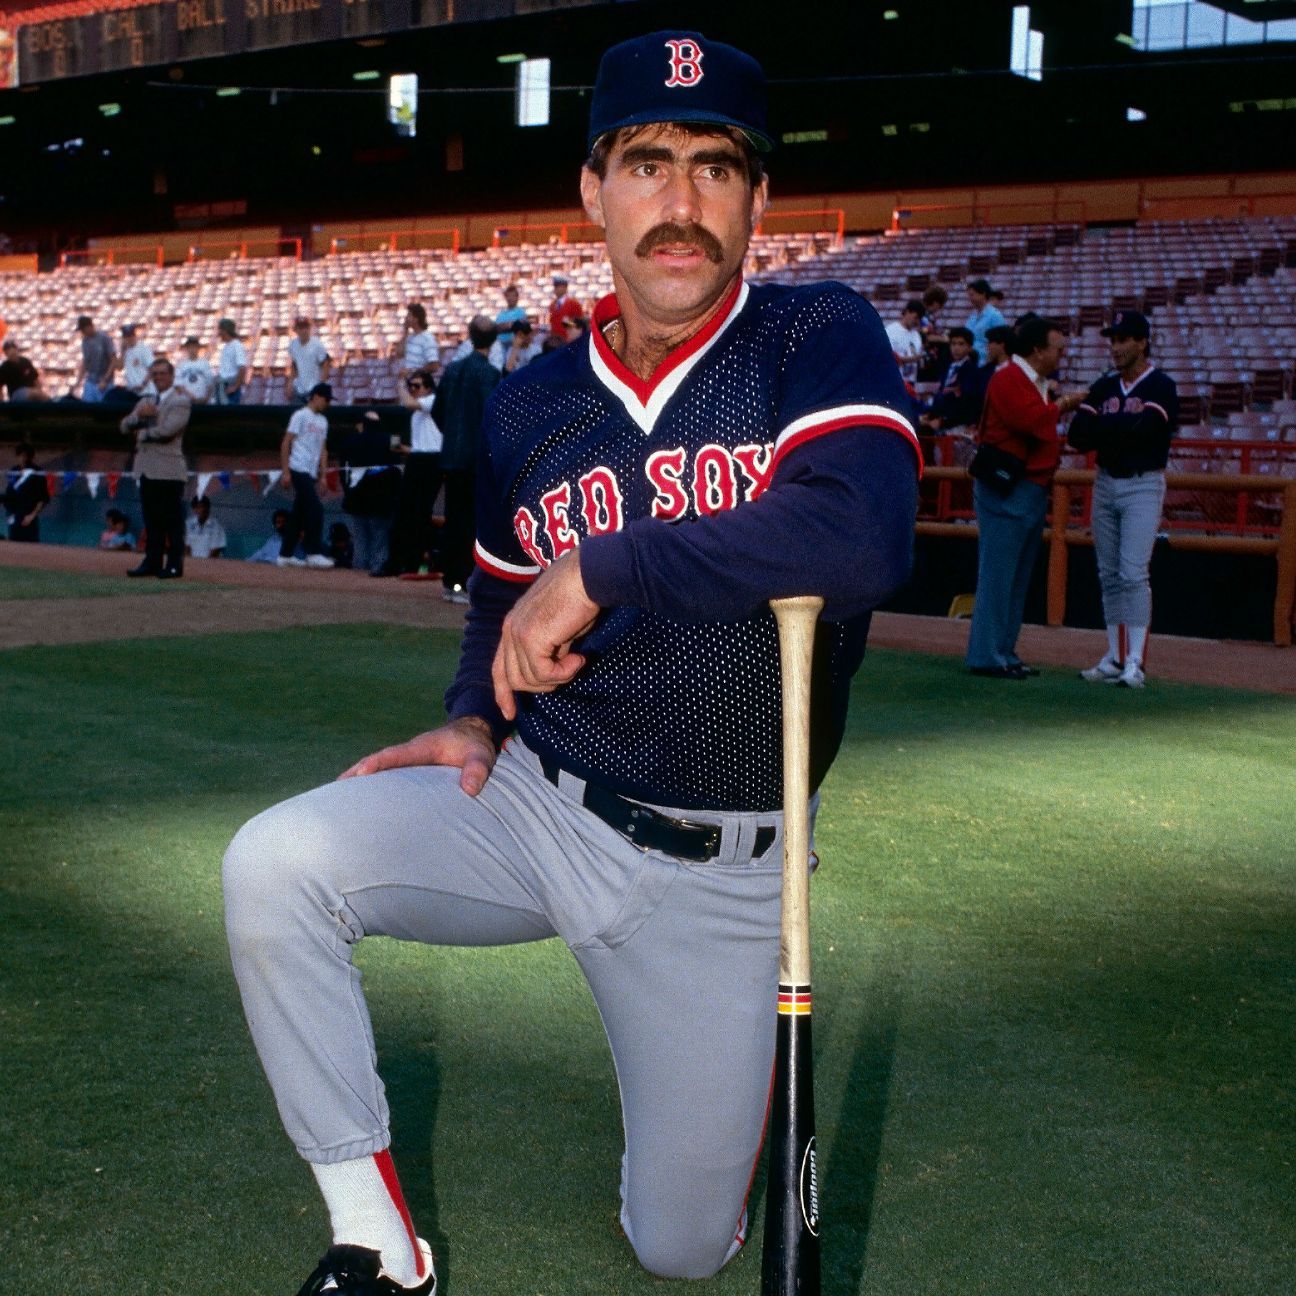 Bill Buckner deserves to be remembered for more than his baseball blunder  (Opinion)